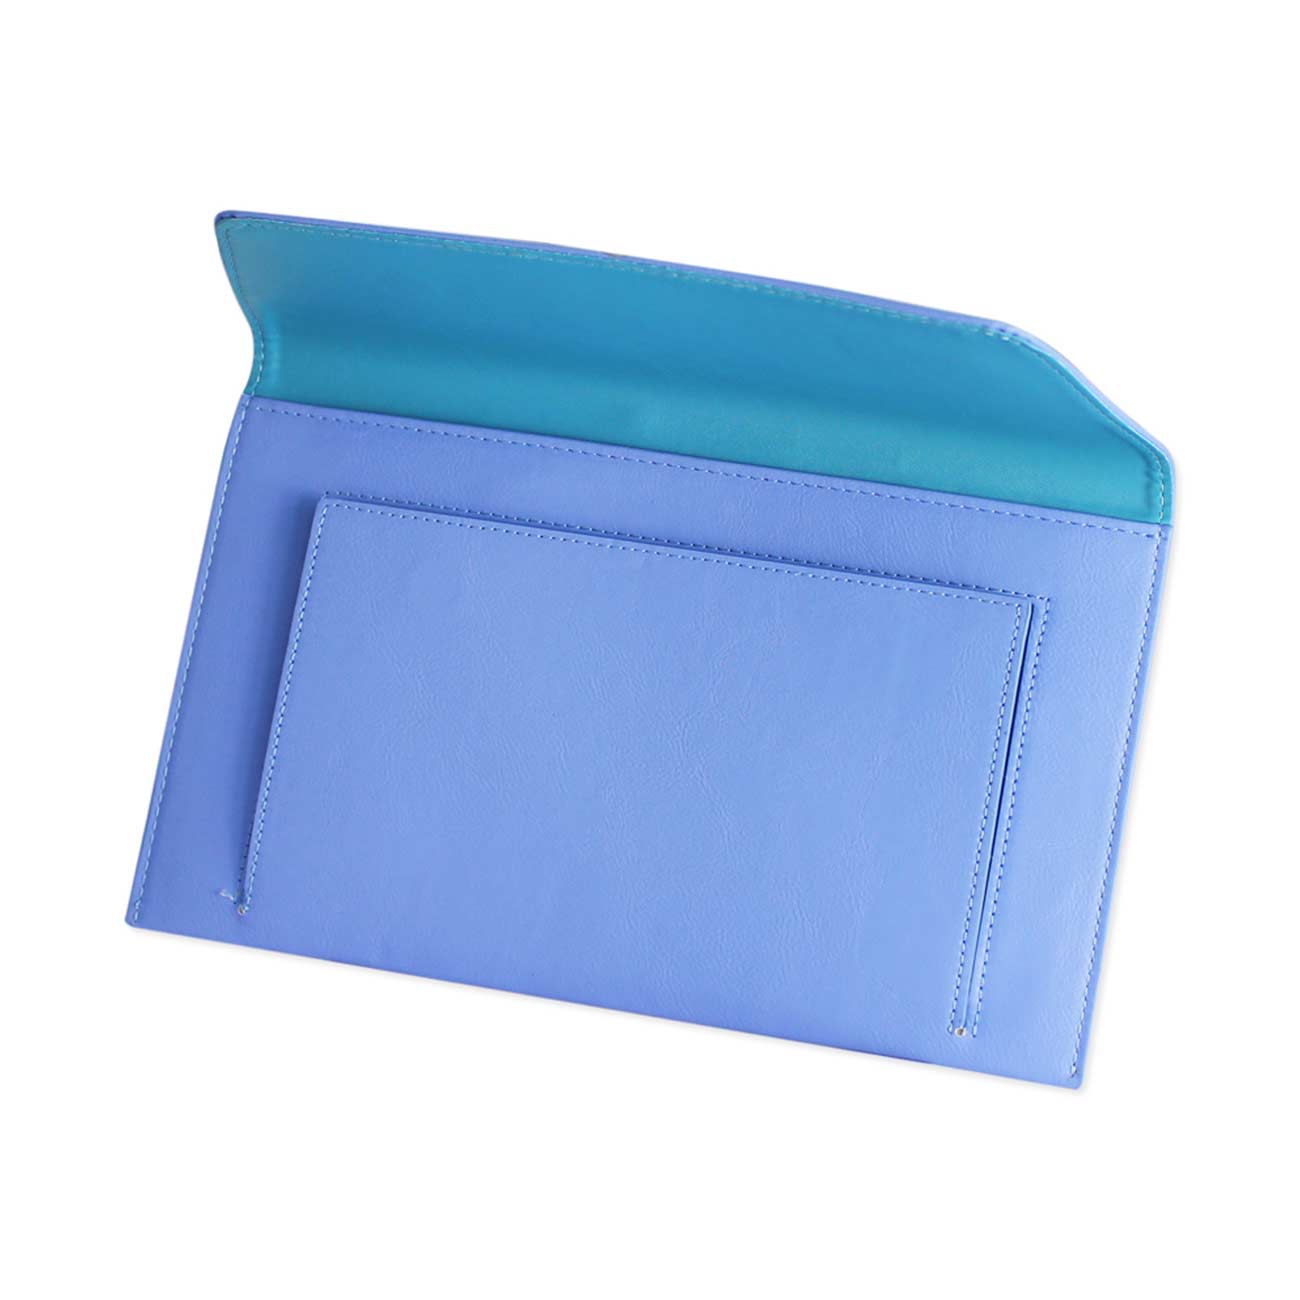 REIKO PREMIUM LEATHER CASE POUCH FOR 11.6INCHES IPADS AND TABLETS In BLUE